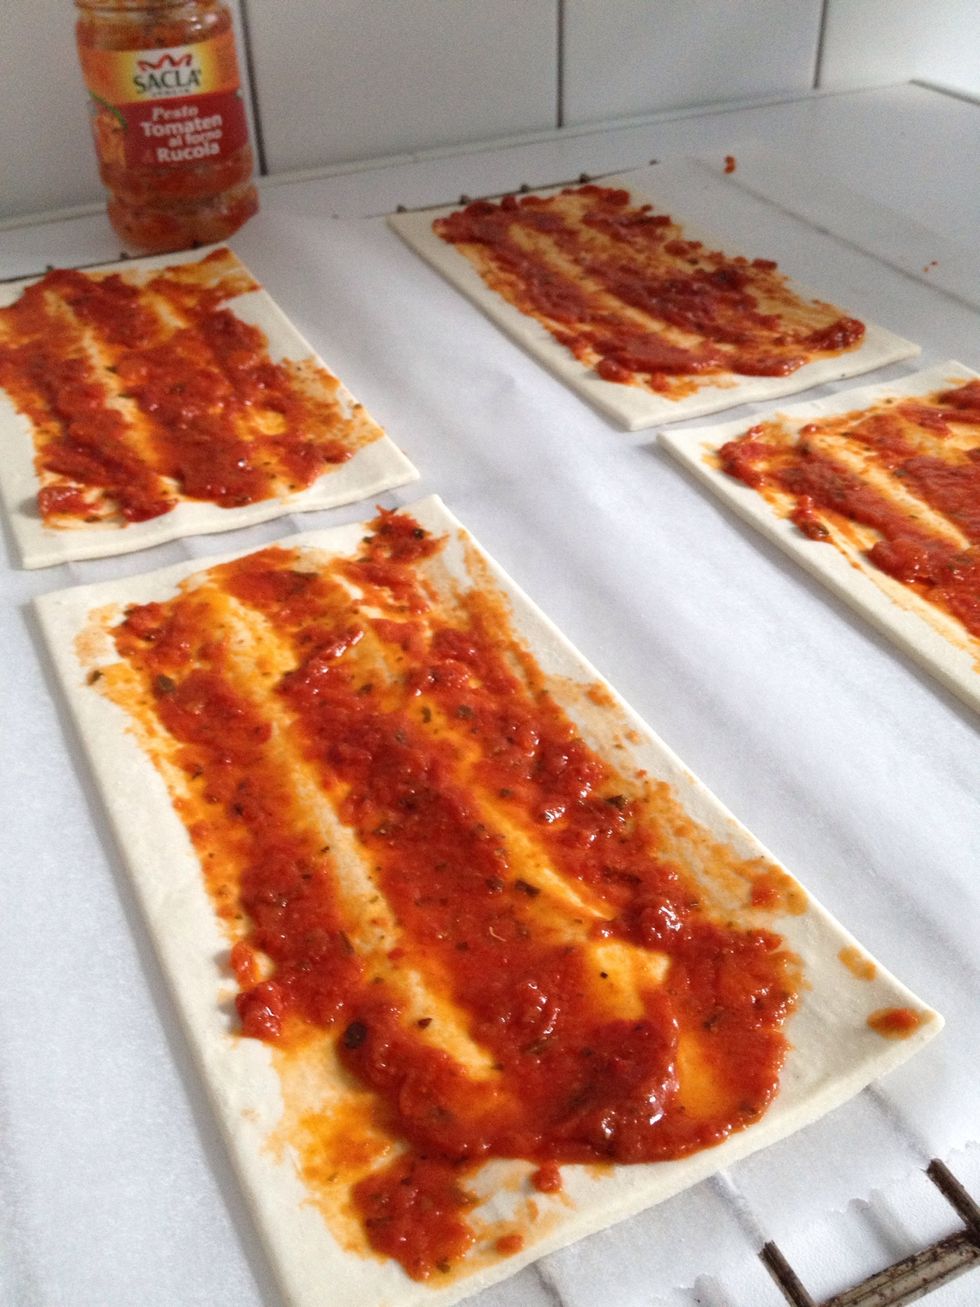 Lay puff pastry sheets out on baking paper (let them thaw if frozen) and spread the red pesto.